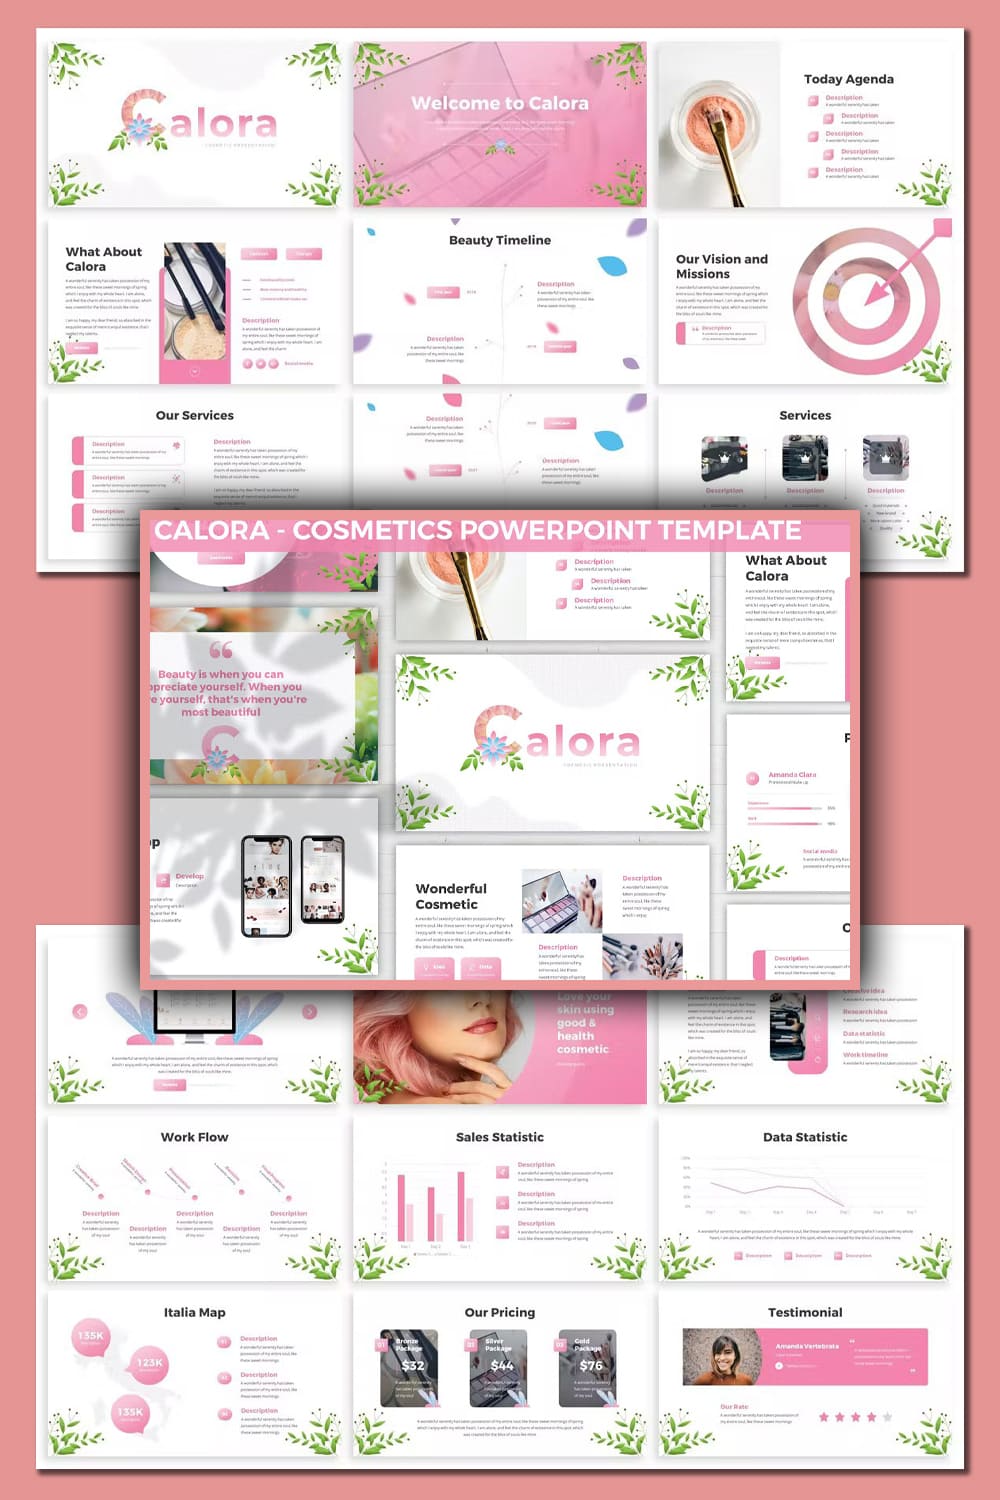 Compilation of images of irresistible cosmetics slide presentation template.